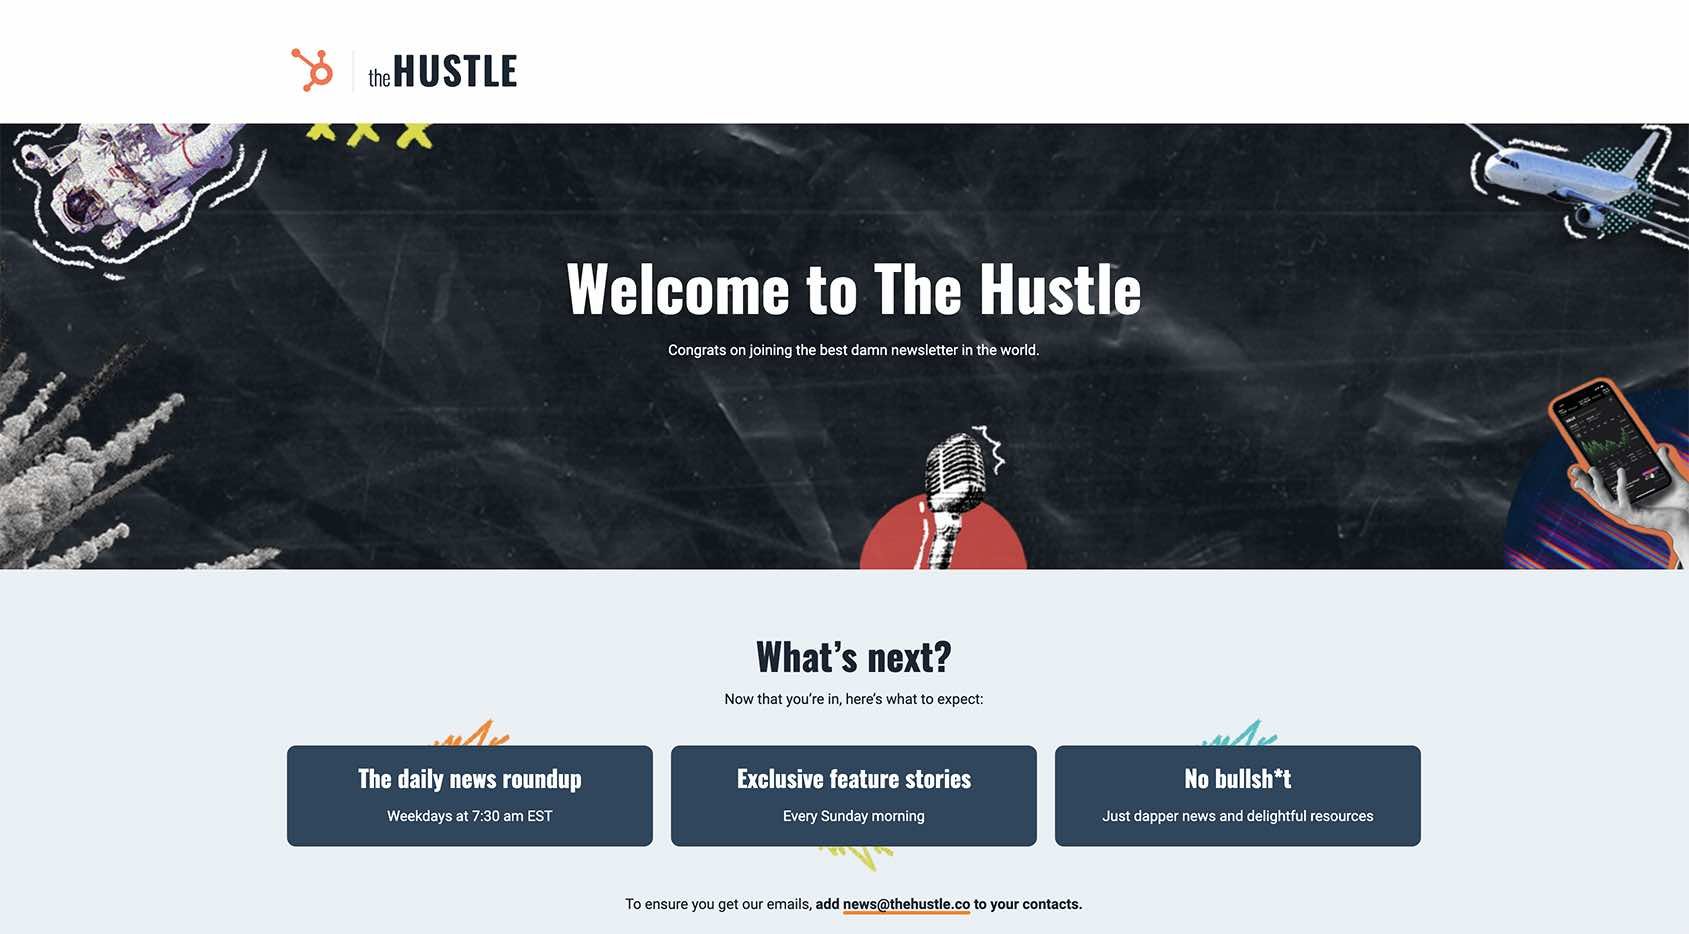 newsletter sign up form examples the hustle thankyou.jpg?width=1689&name=newsletter sign up form examples the hustle thankyou - How to Increase Email Sign-ups With Better Forms (+Examples)